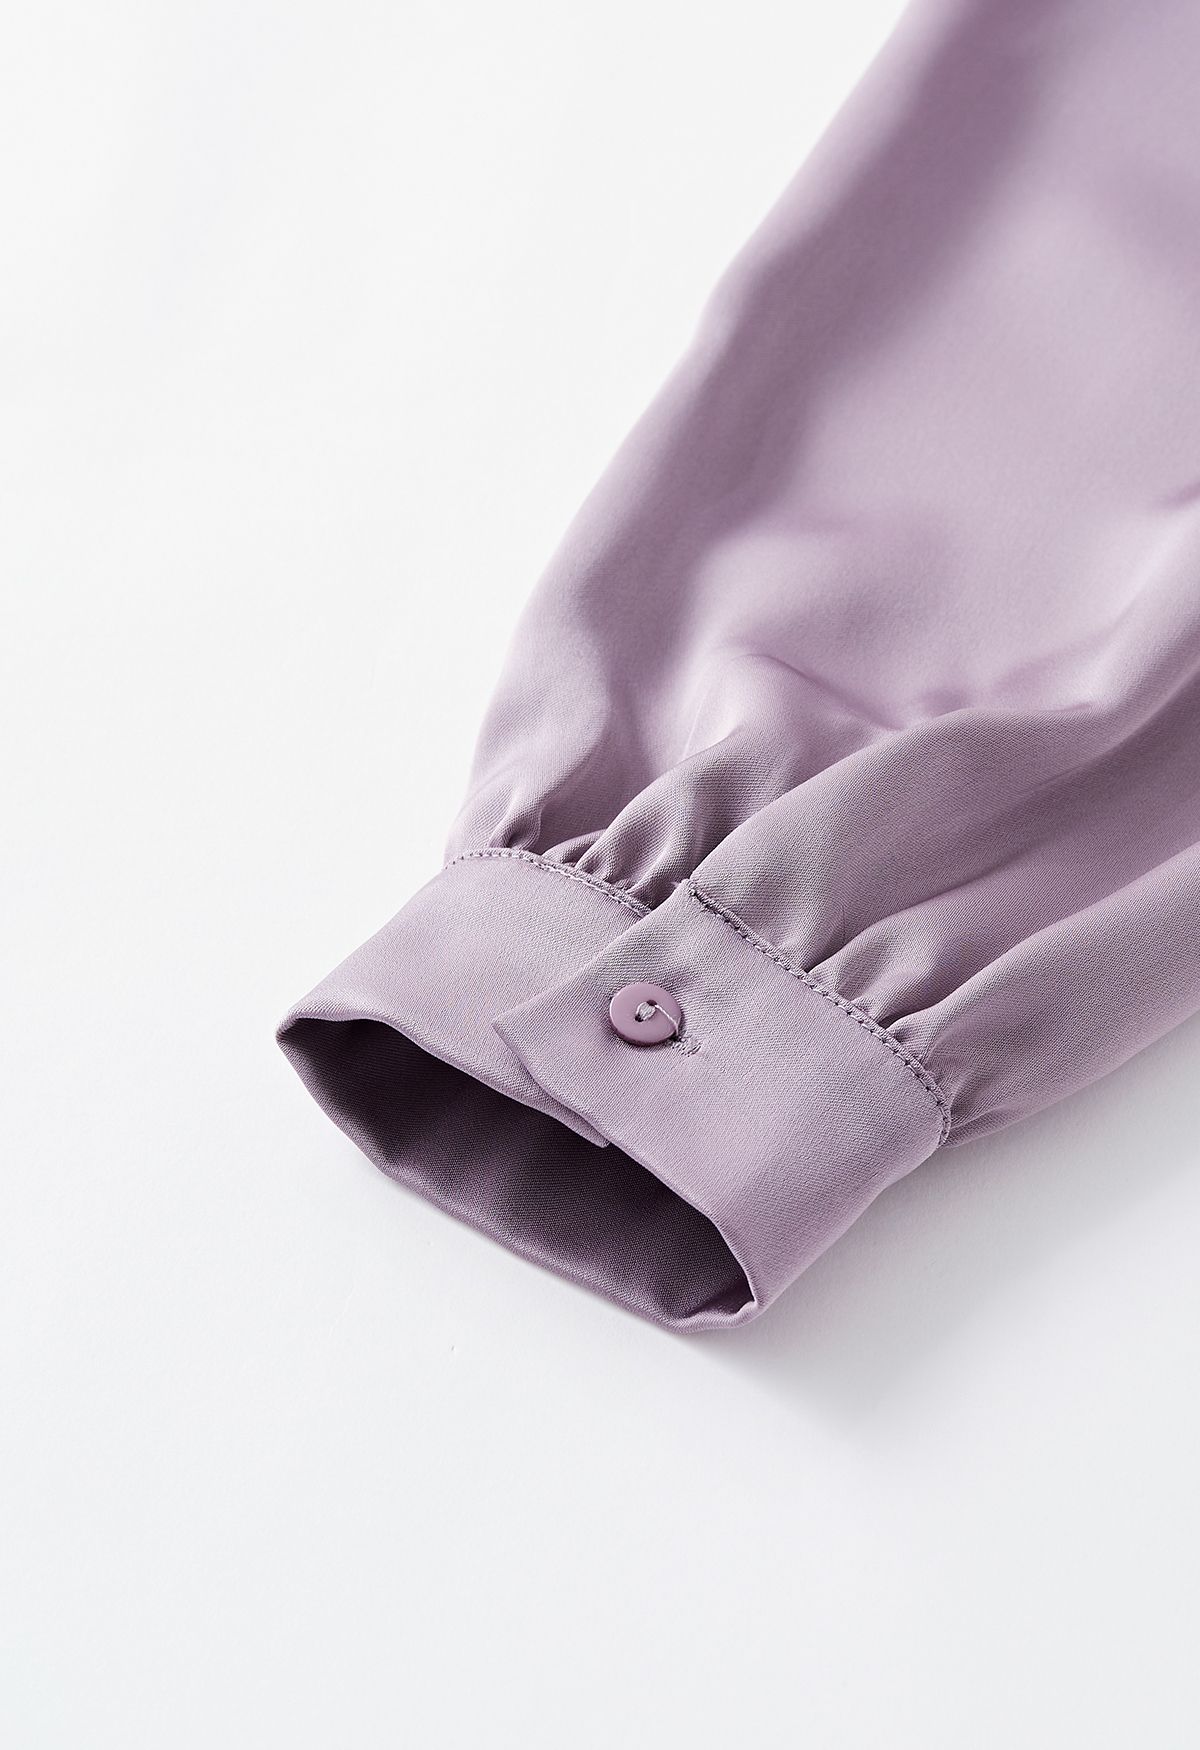 Doll Collar Faux Wrap Satin Top in Lilac